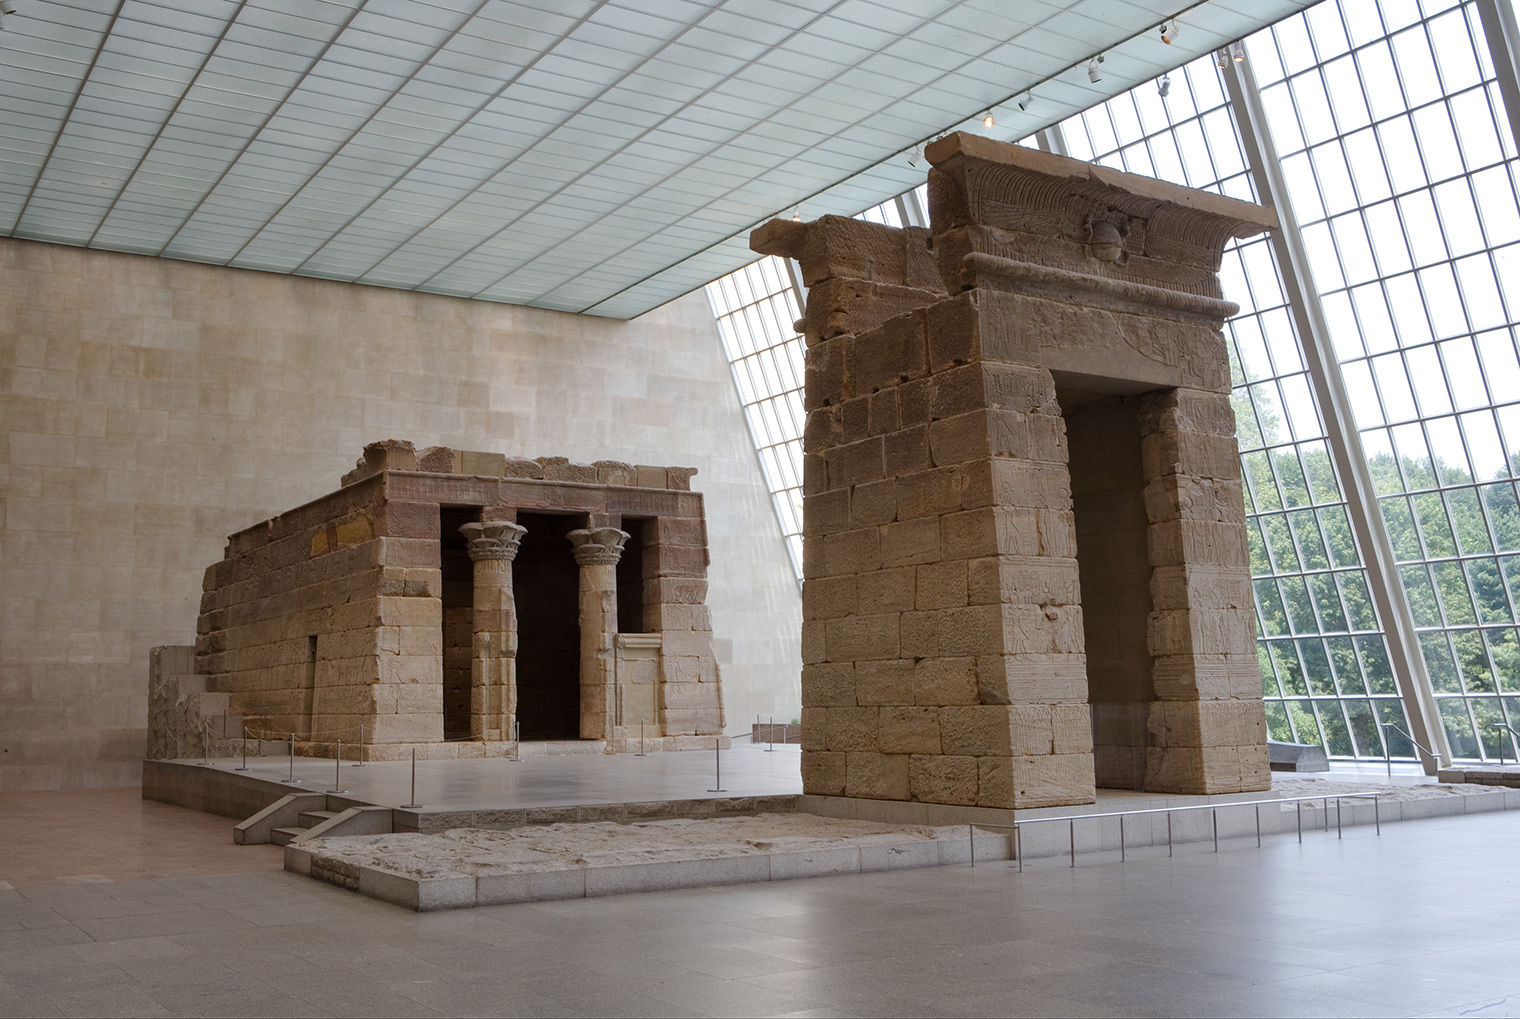 A view of the Temple of Dendur, with the tall narrow gateway in the foreground, and the square temple in the back, looking toward a wall of windows